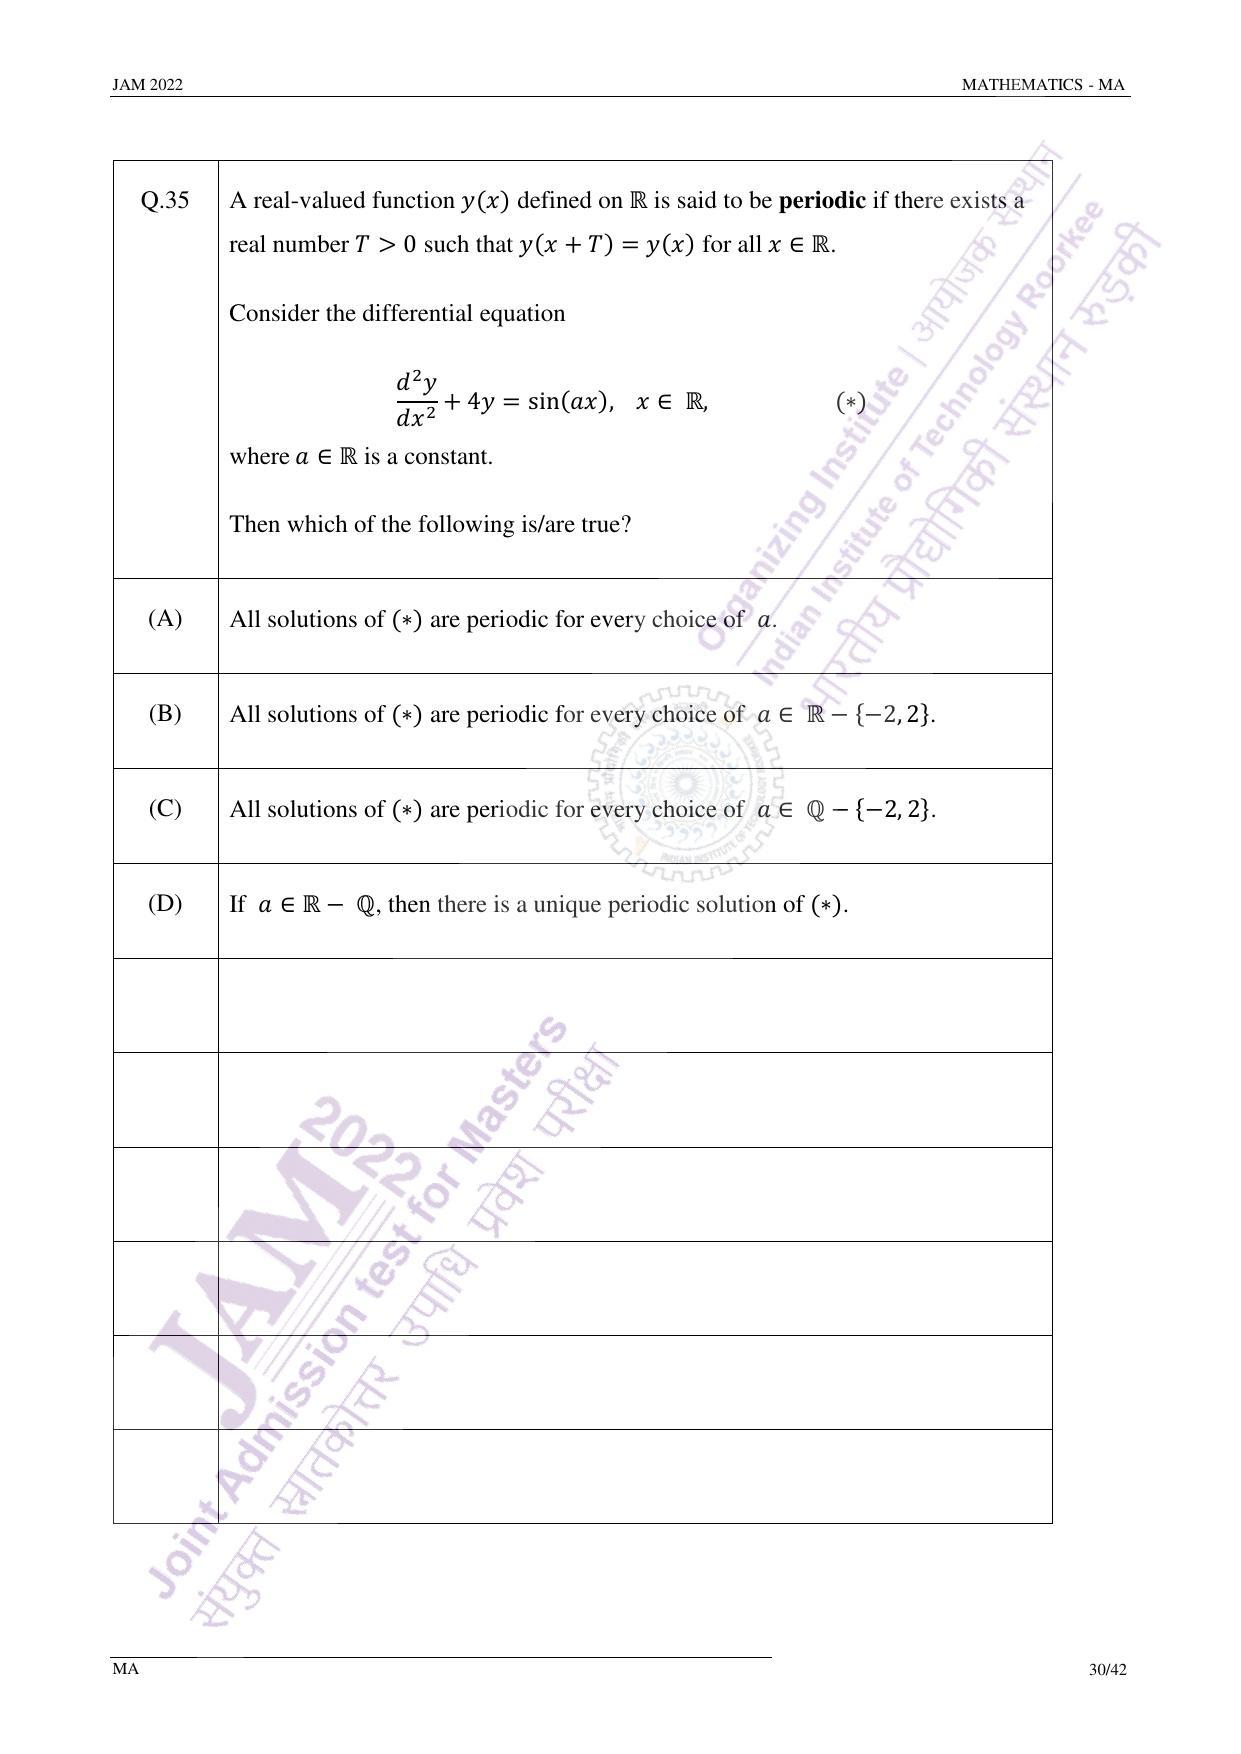 JAM 2022: MA Question Paper - Page 30